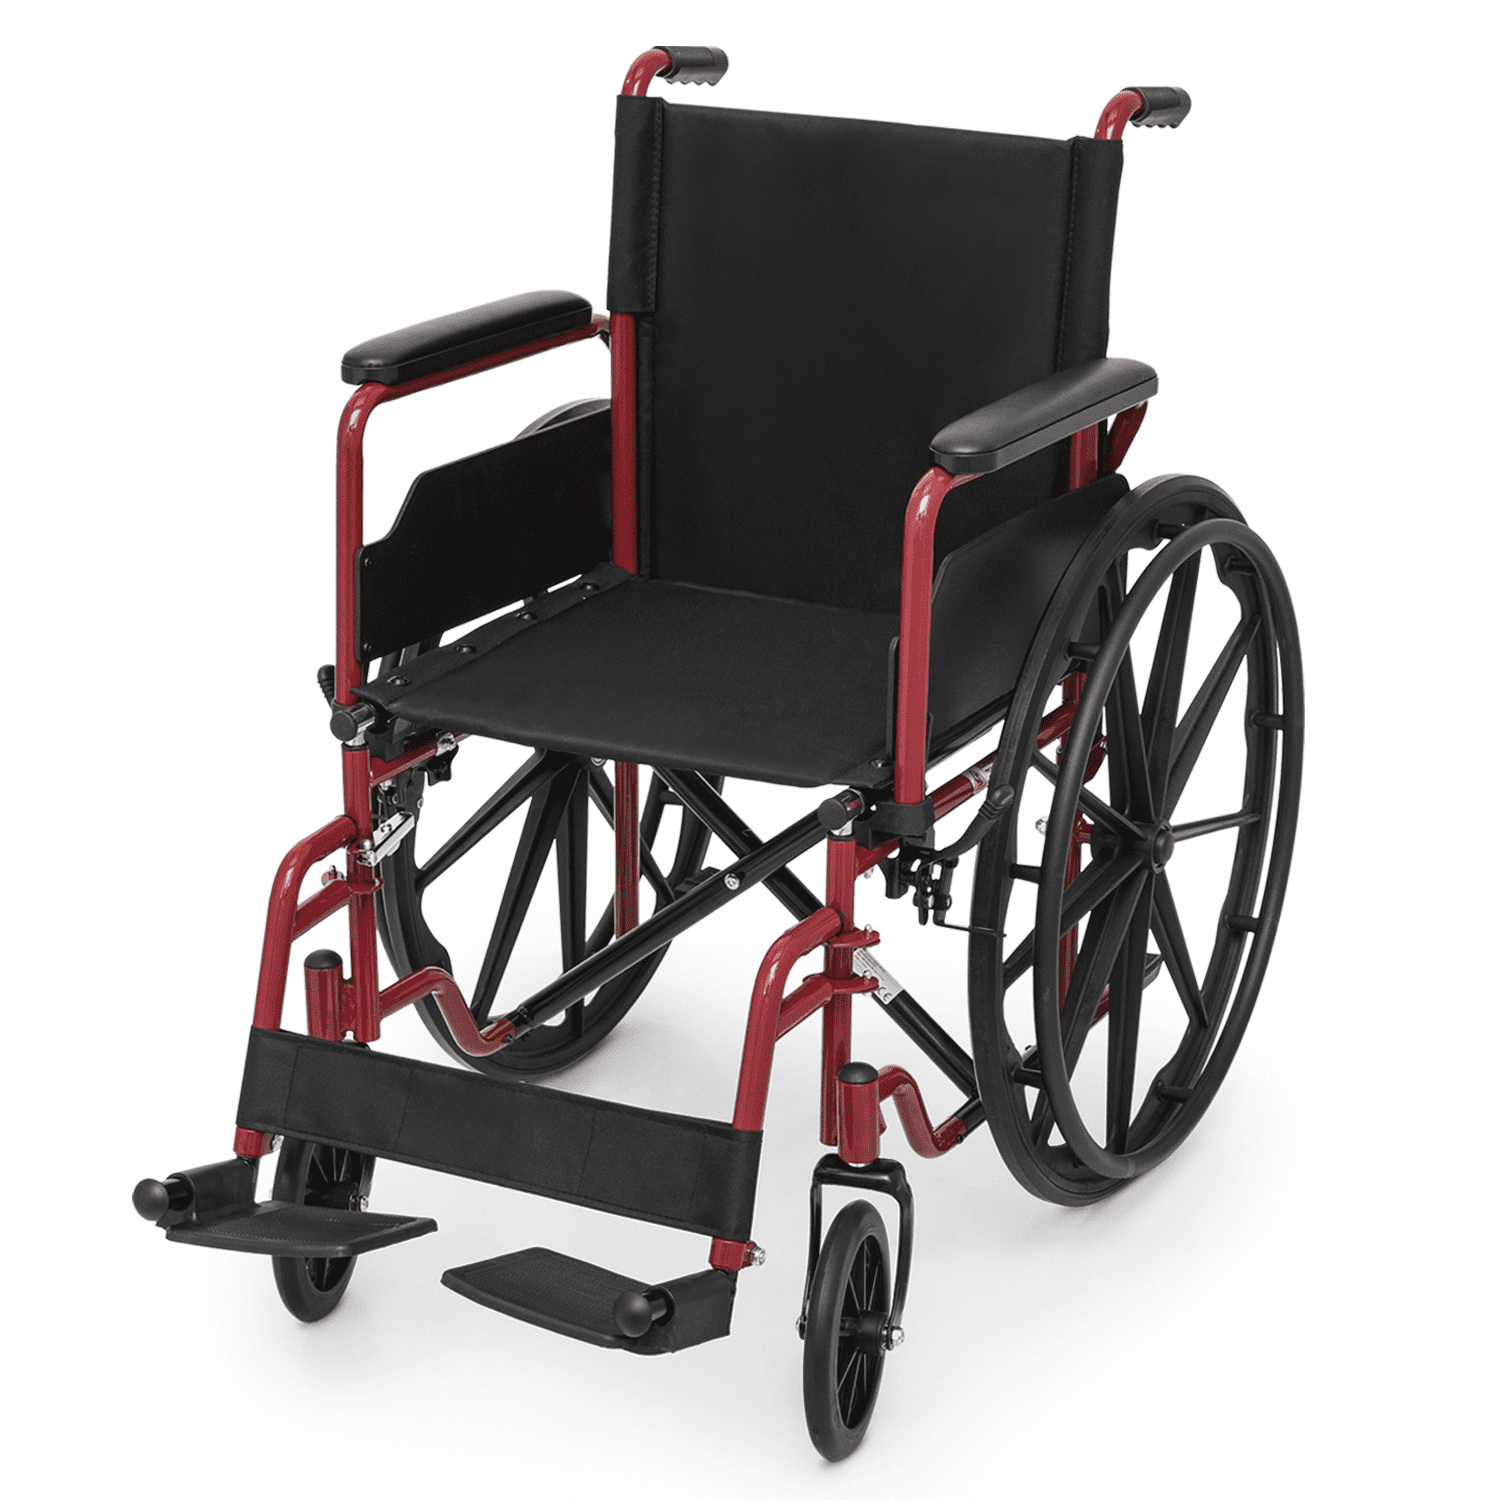 Magshion *FDA APPROVED* Transport Wheelchair 300lbs Weight